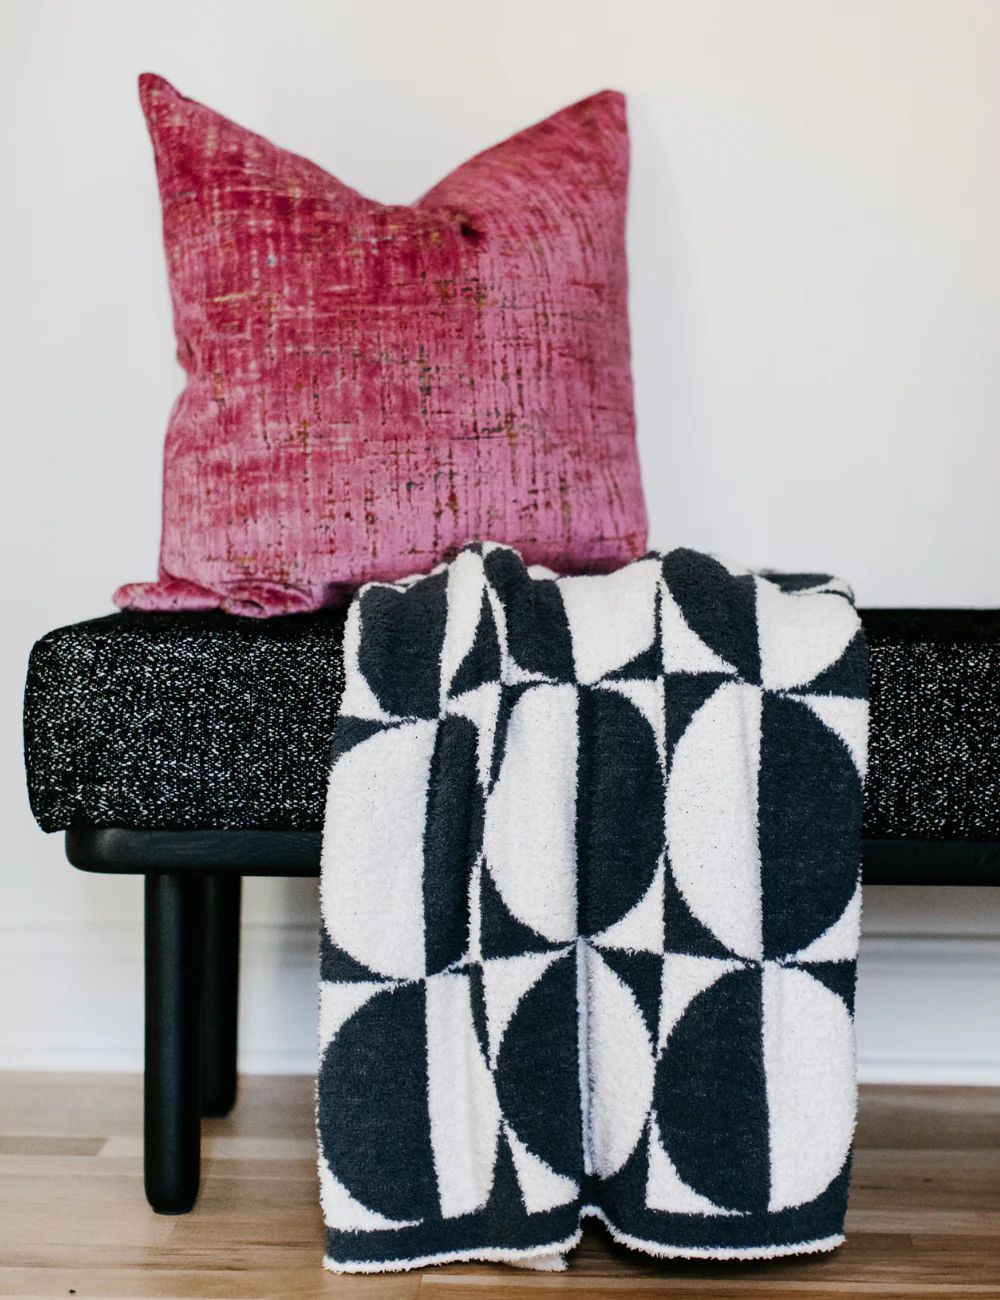 TSC x Tia Booth: Mod Circle Buttery Blanket | The Styled Collection